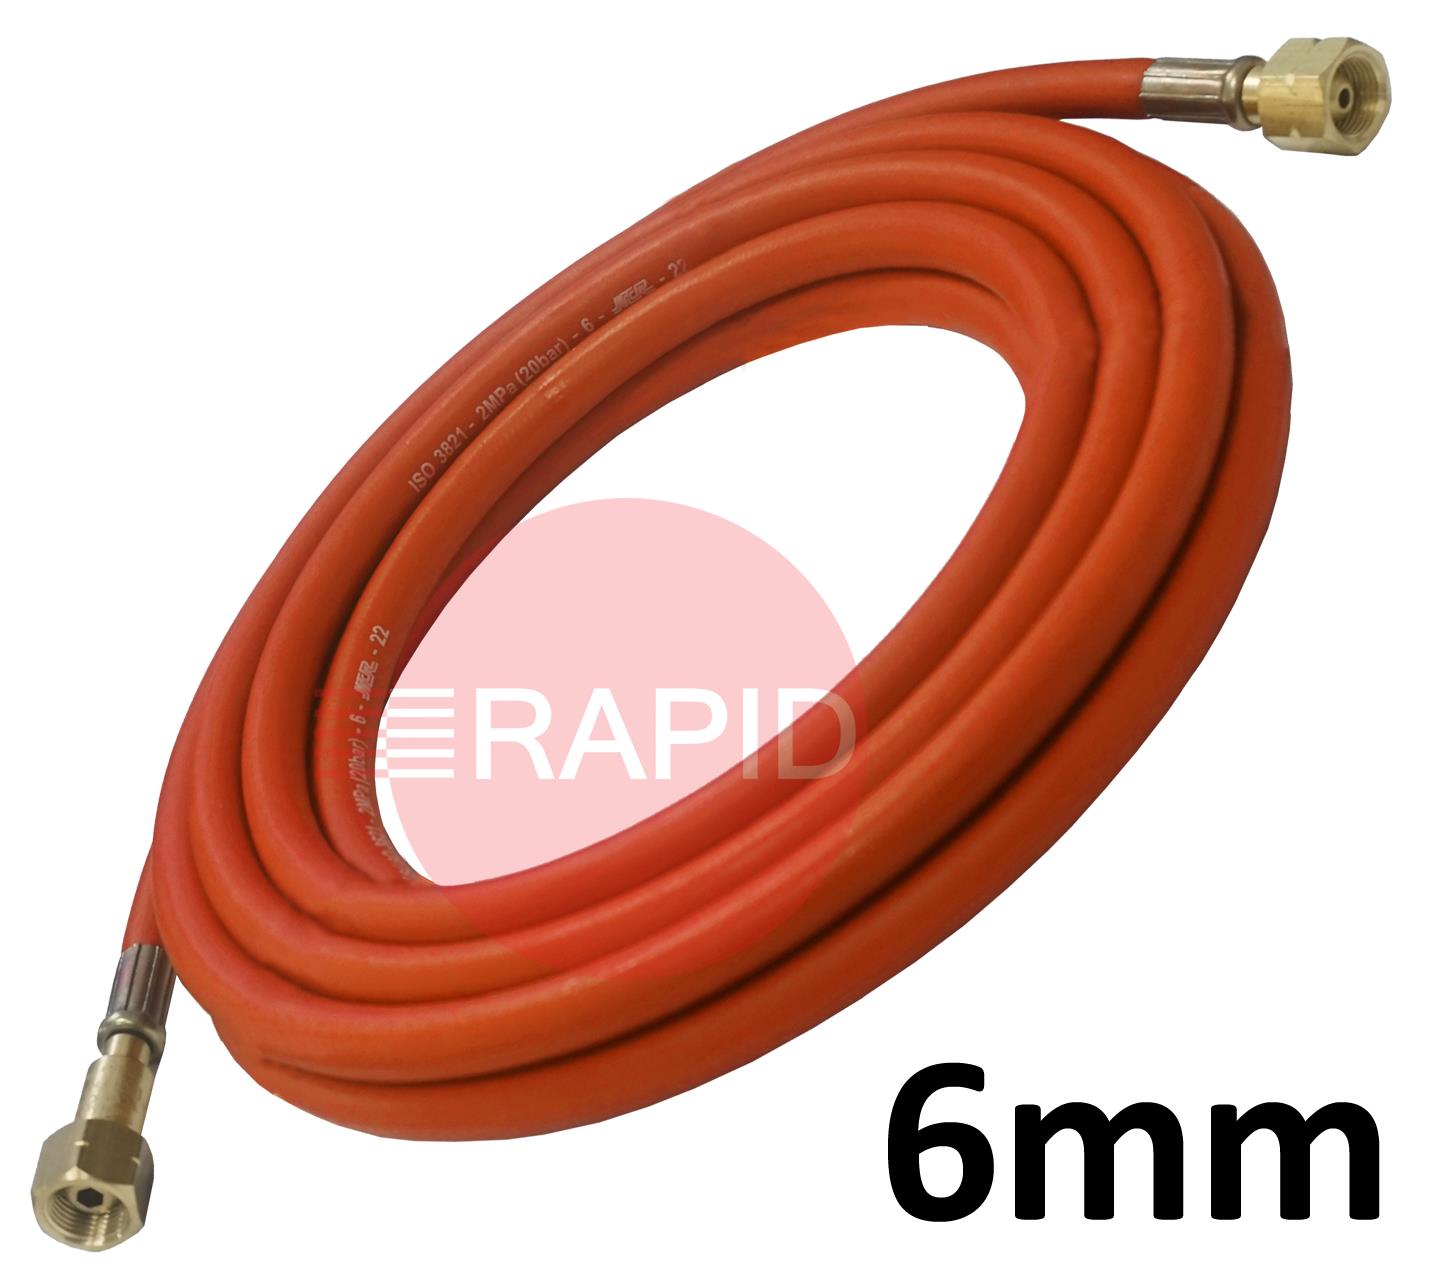 A5141  Fitted Propane Hose. 6mm Bore. G3/8 Check Valve & G3/8 Regulator Connection - 10m